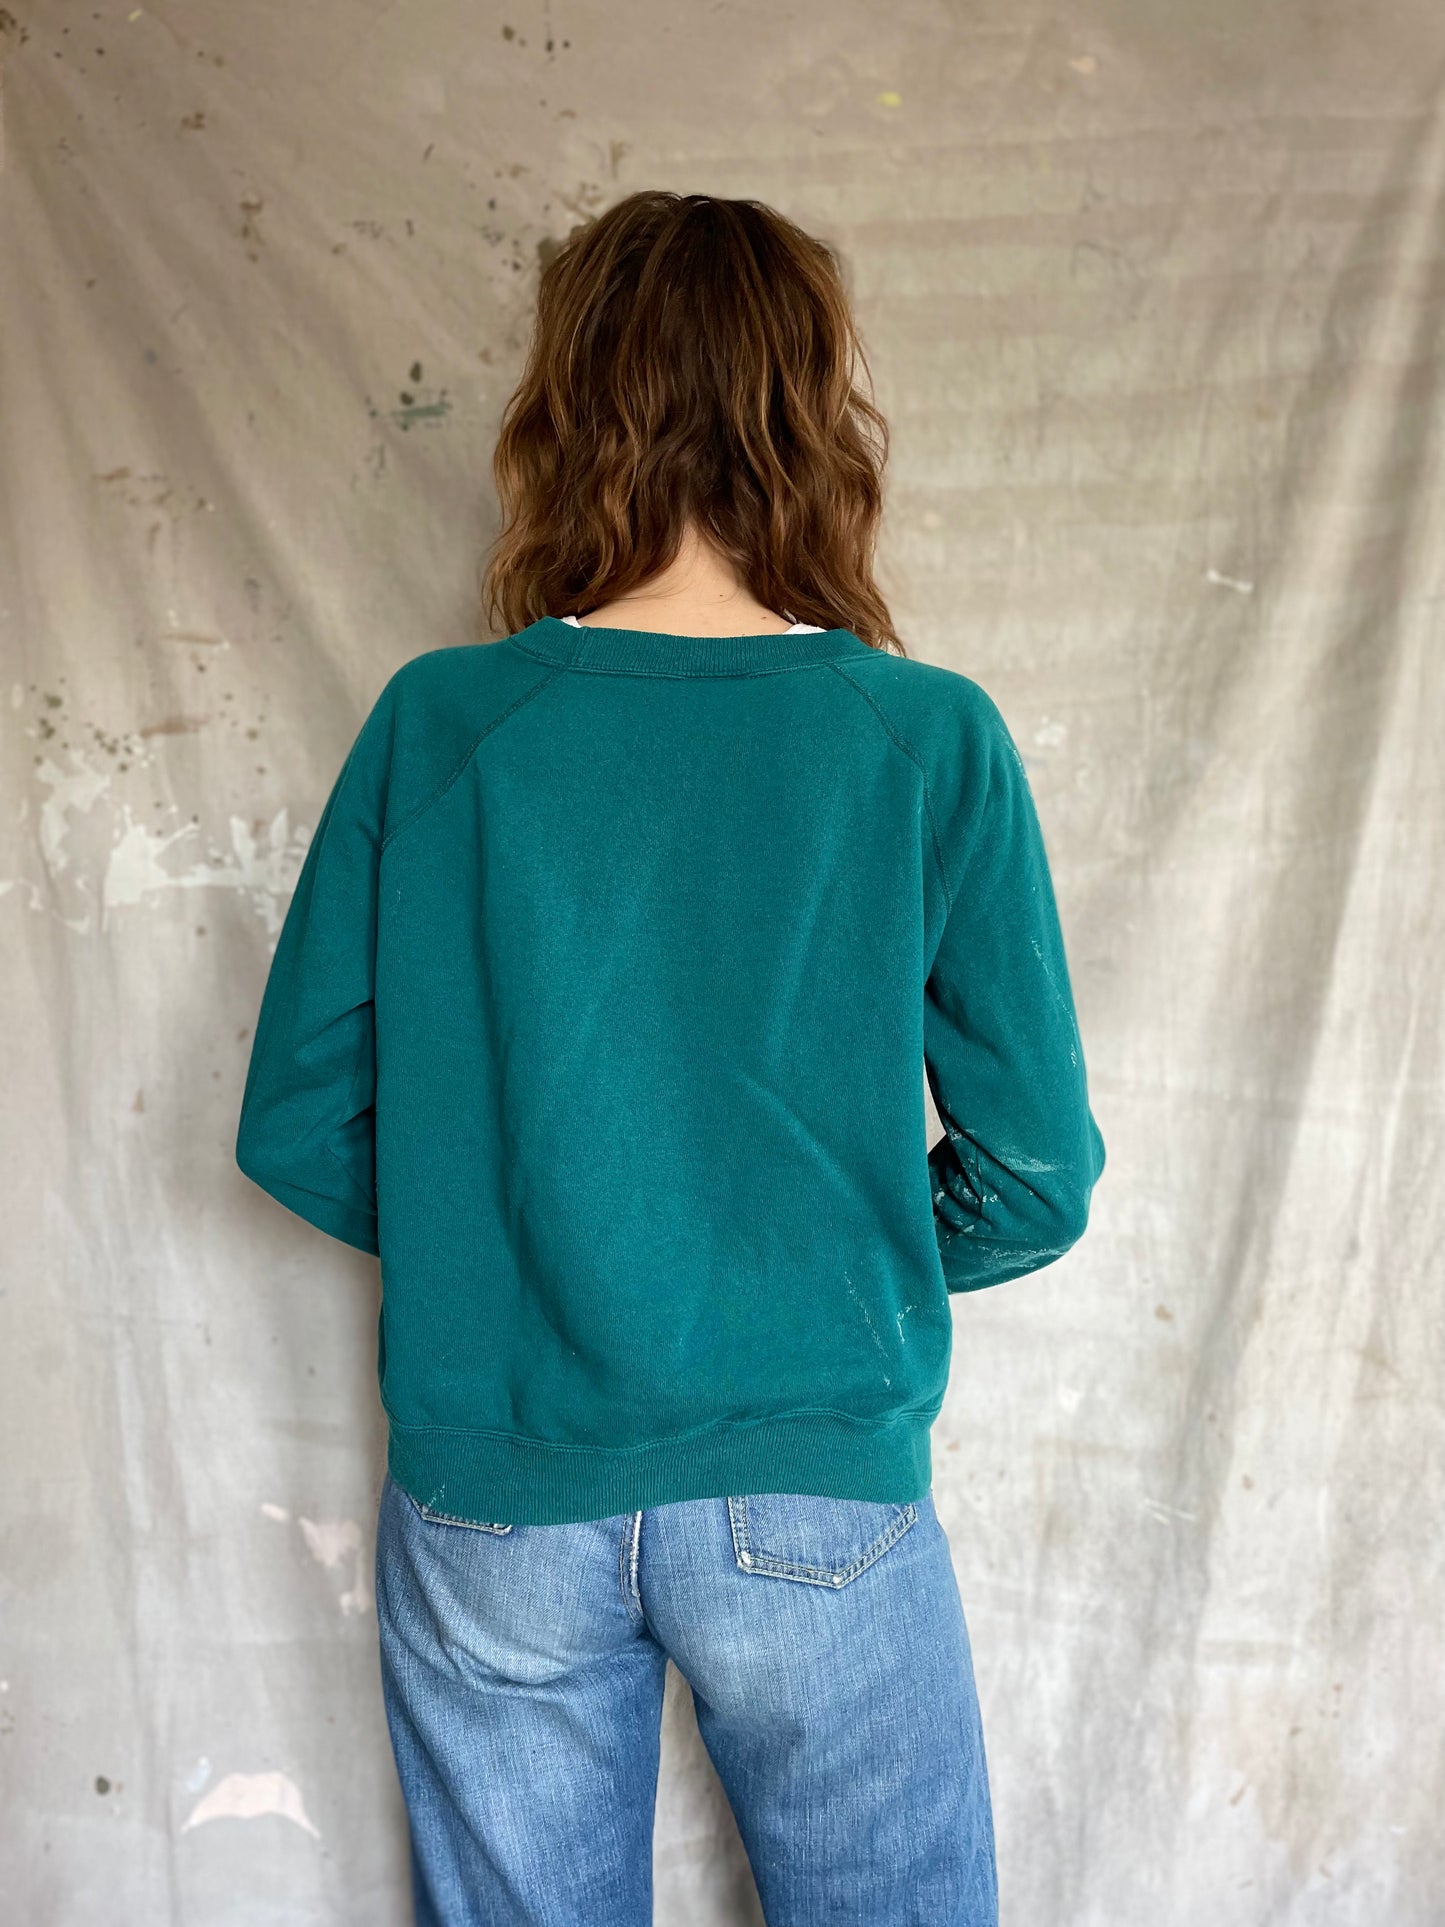 90s Teal Paint Stained Sweatshirt